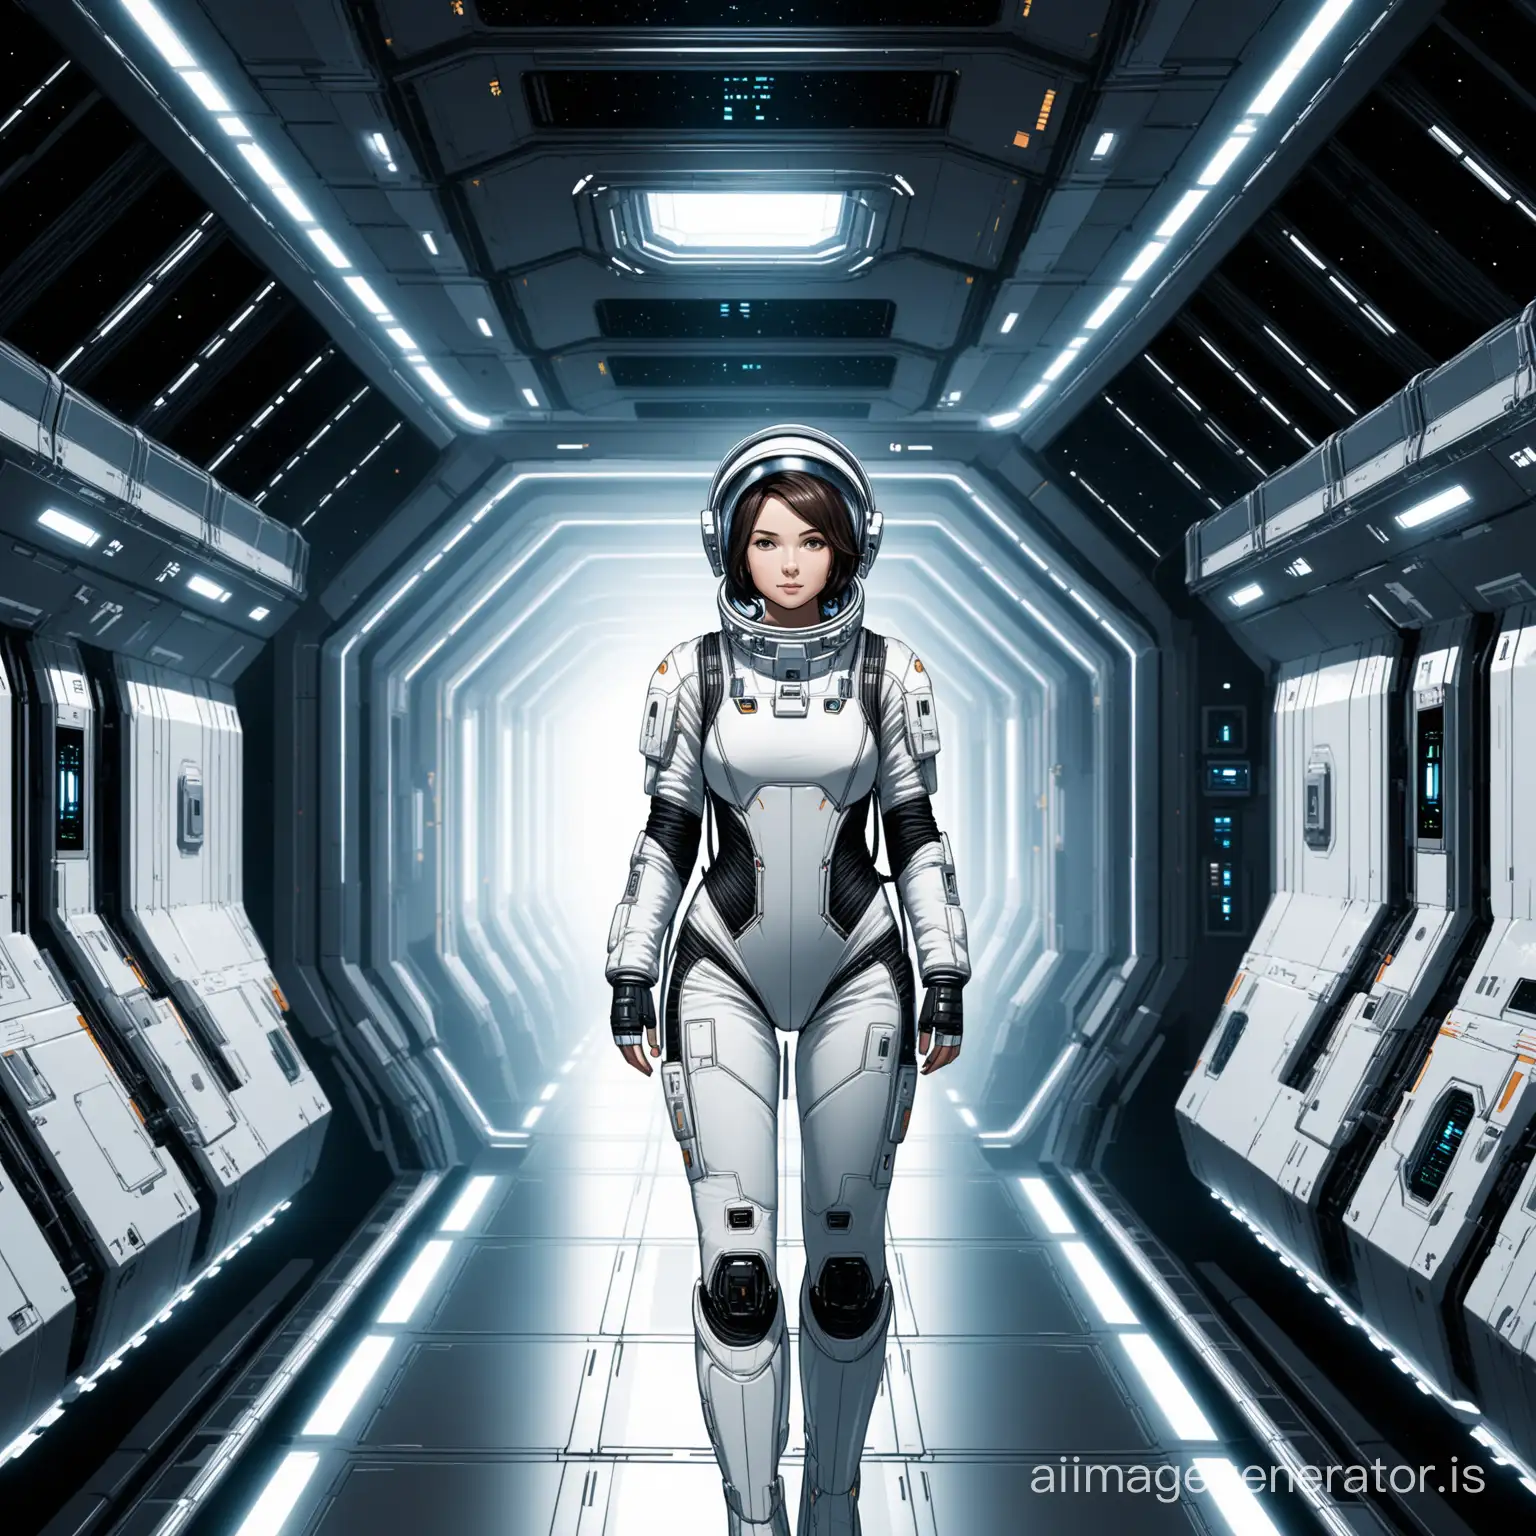 A photorealistic 3d render of a lovely short hair brunette woman in a robotic astronaute space suit with a helmet on her head standing ground level inside a space station hallway. The woman's looks to be in her late twenties. The woman is at the center in depth of the hallway, we can see her bionic boots. She appears to be looking straight ahead. The space station is white with various machinery, equipment and an a closed door visible in the background. The helmet has a visor on the left side. The image has a color palette of white, gray, and black. The overall atmosphere is futuristic and space-themed.